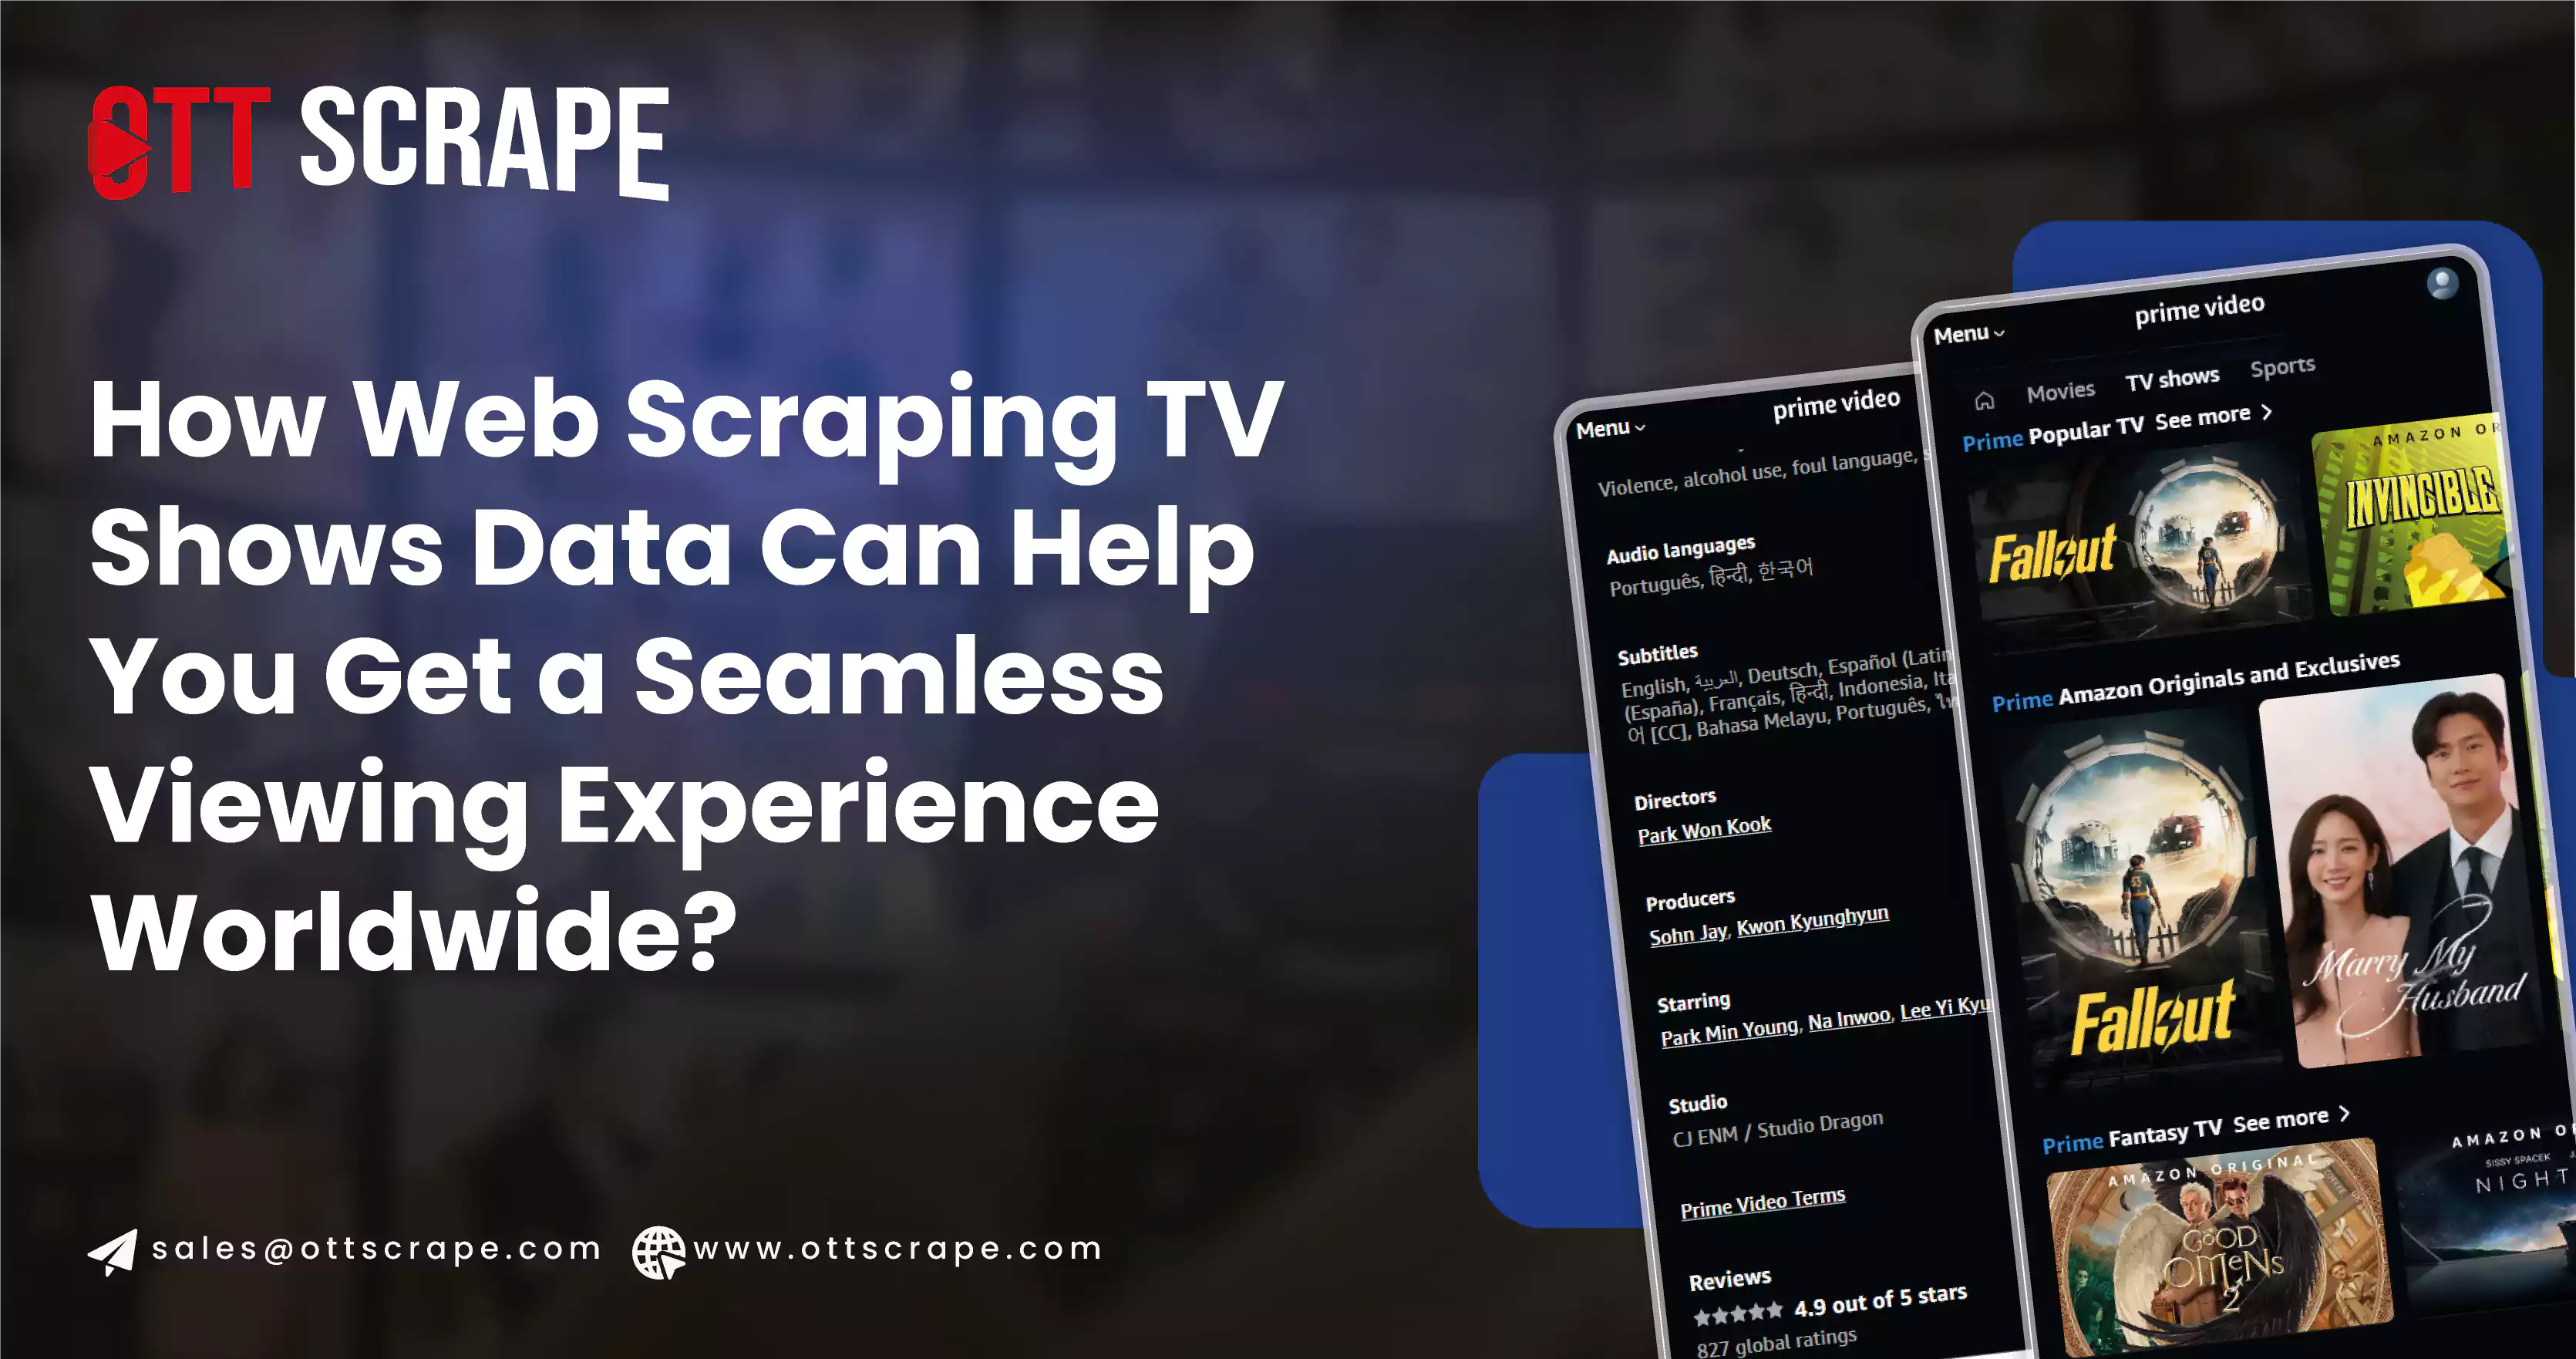 How-Web-Scraping-TV-Shows-Data-Can-Help-You-Get-a-Seamless-Viewing-Experience-Worldwide